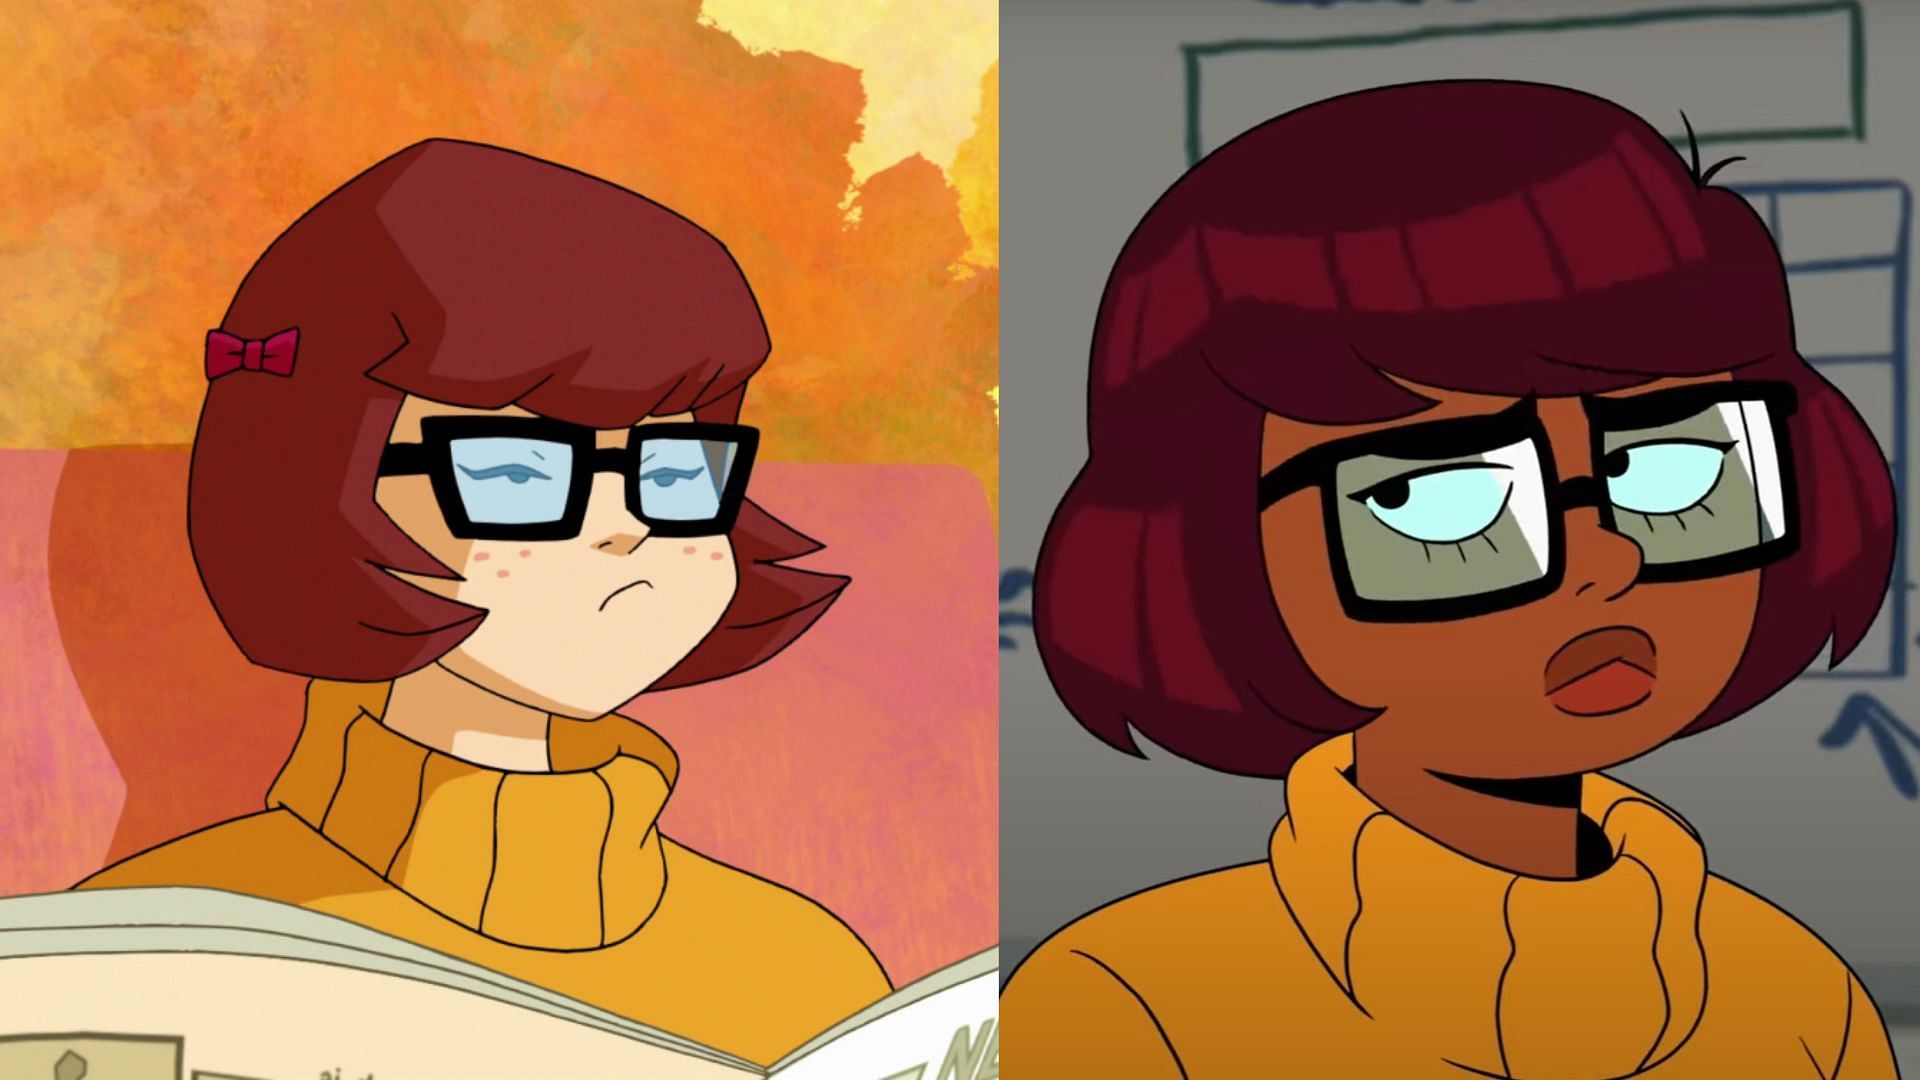 The skin color of Velma has changed to show diversity (Image via HBO and Warner Brothers)